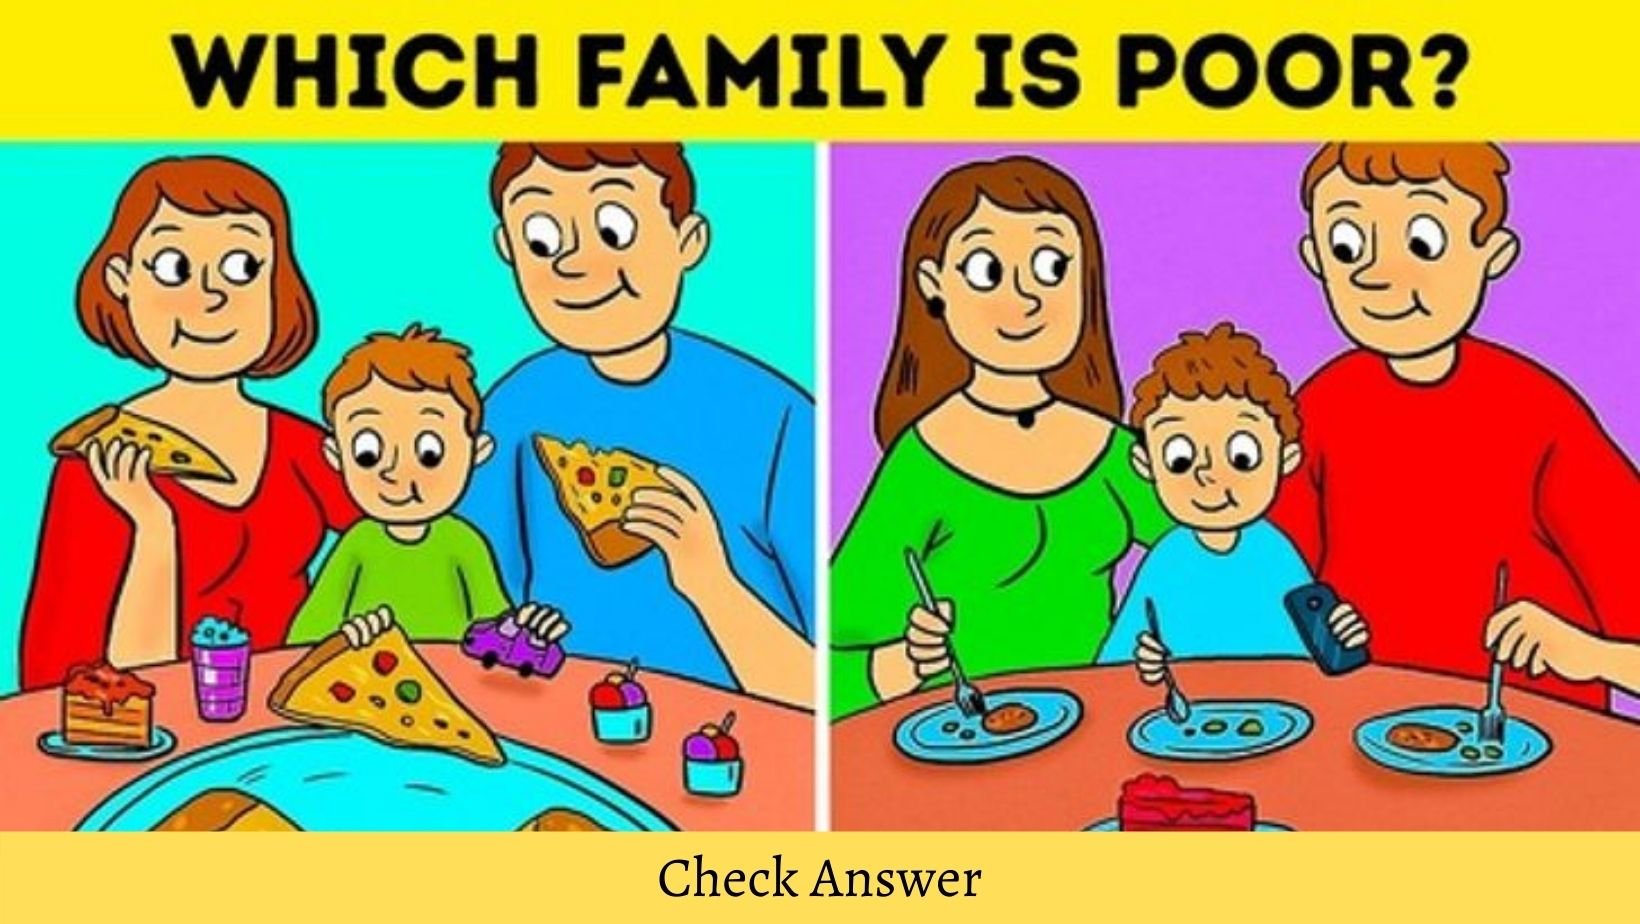 small joys thumbnail 8 1.jpg?resize=1200,630 - Can You Guess Which Family Is Poor?